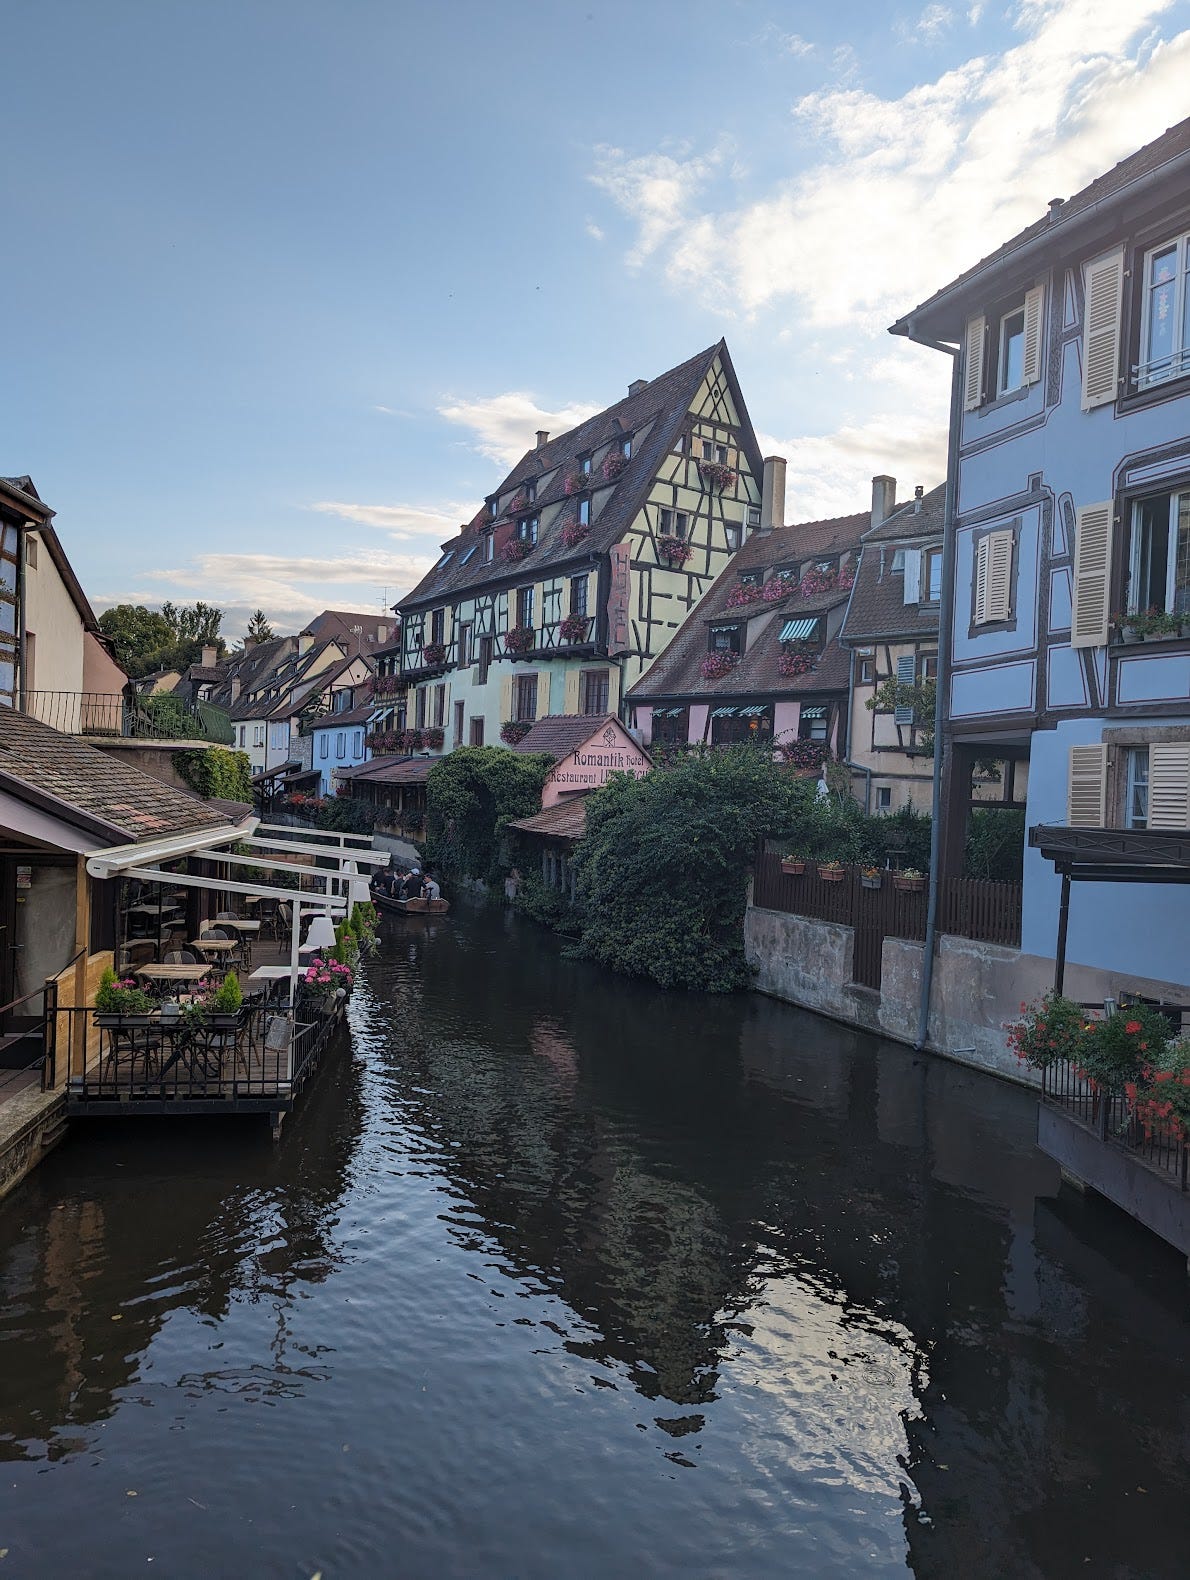 A view of "Little Venice" in Colmar. A canal is flanked by half-timber houses in pastel colors. The scene is picturesque.